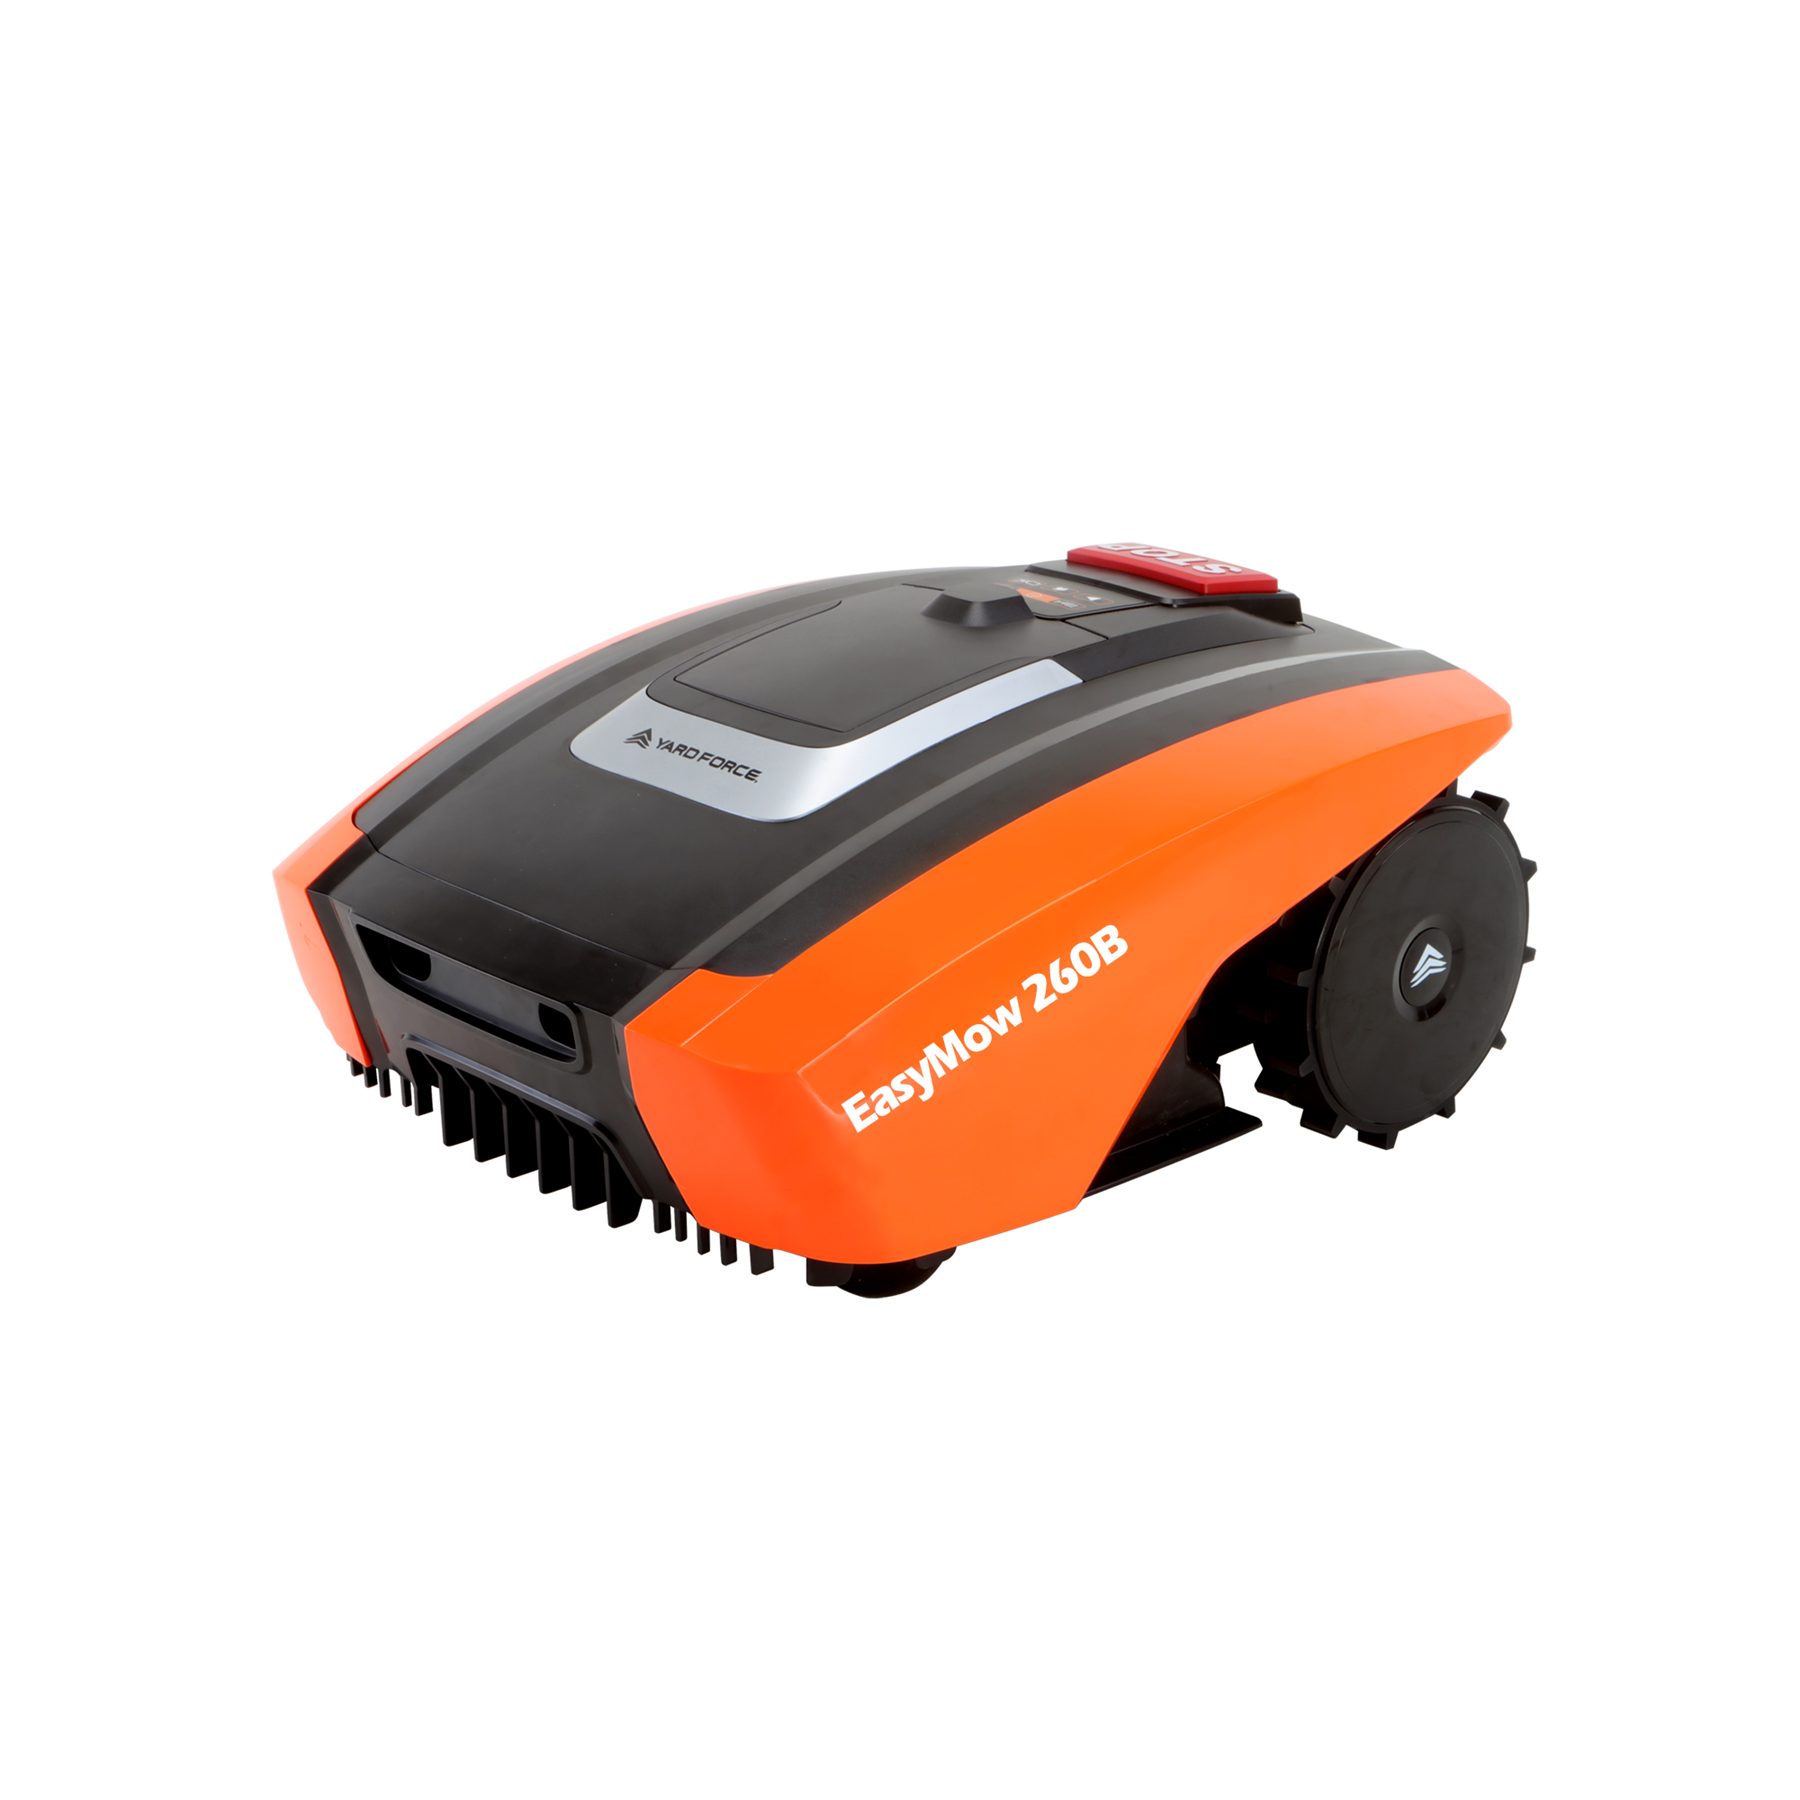 Picture of Yard Force EasyMow 260B Robotic Lawnmower